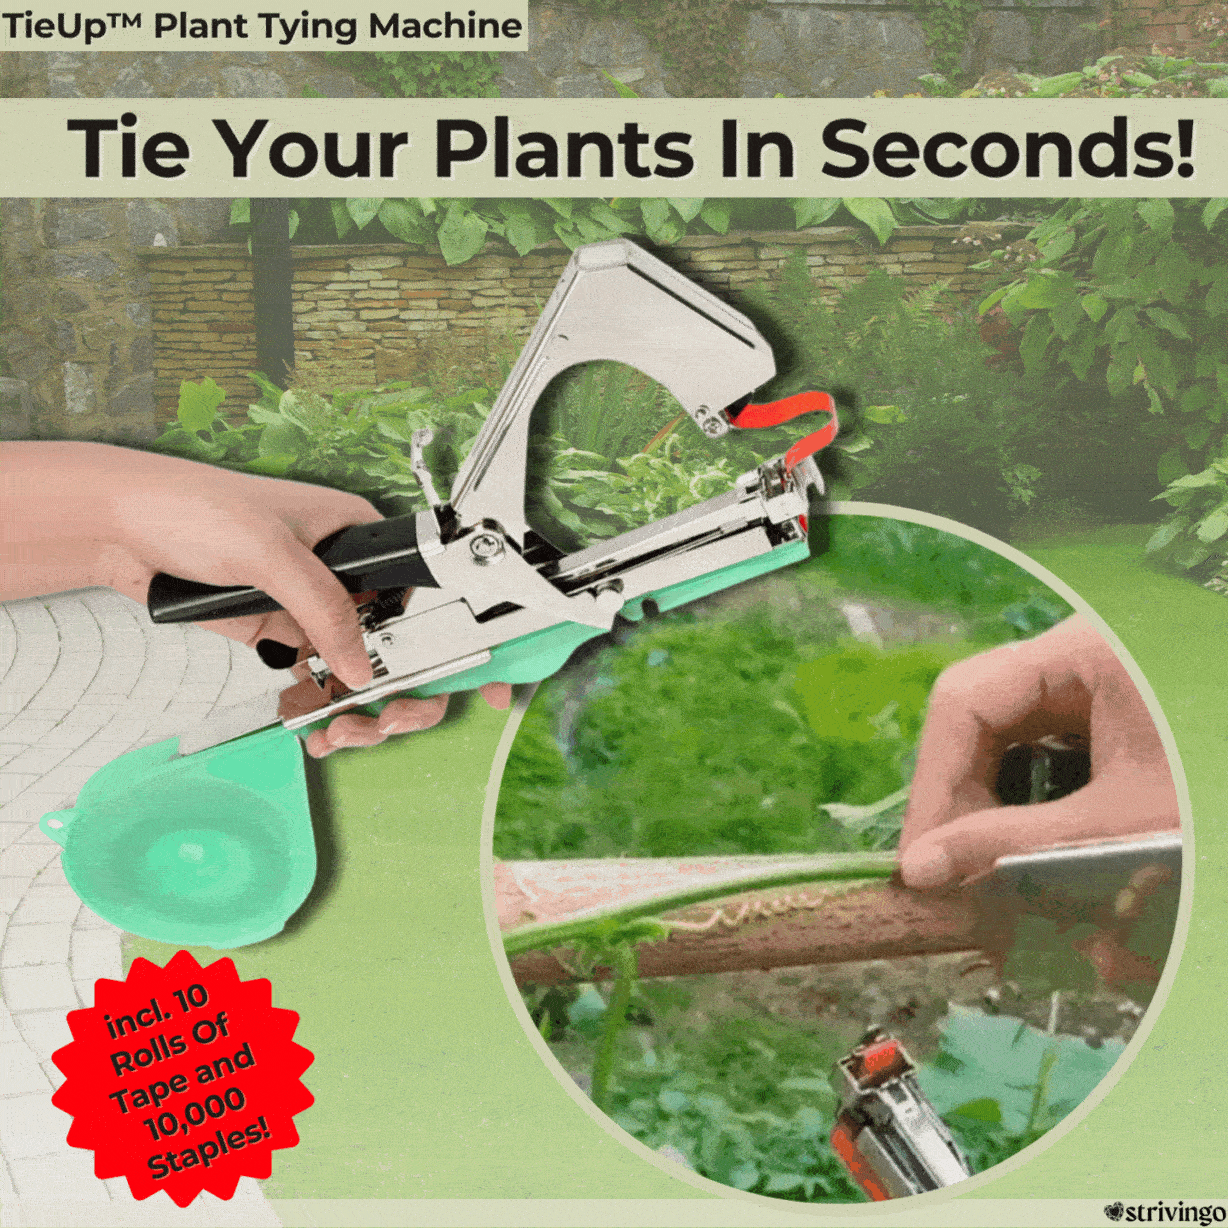 50% OFF ENDS TODAY | TieUp™ Plant Tying Machine | incl. 10 Rolls Of Tape